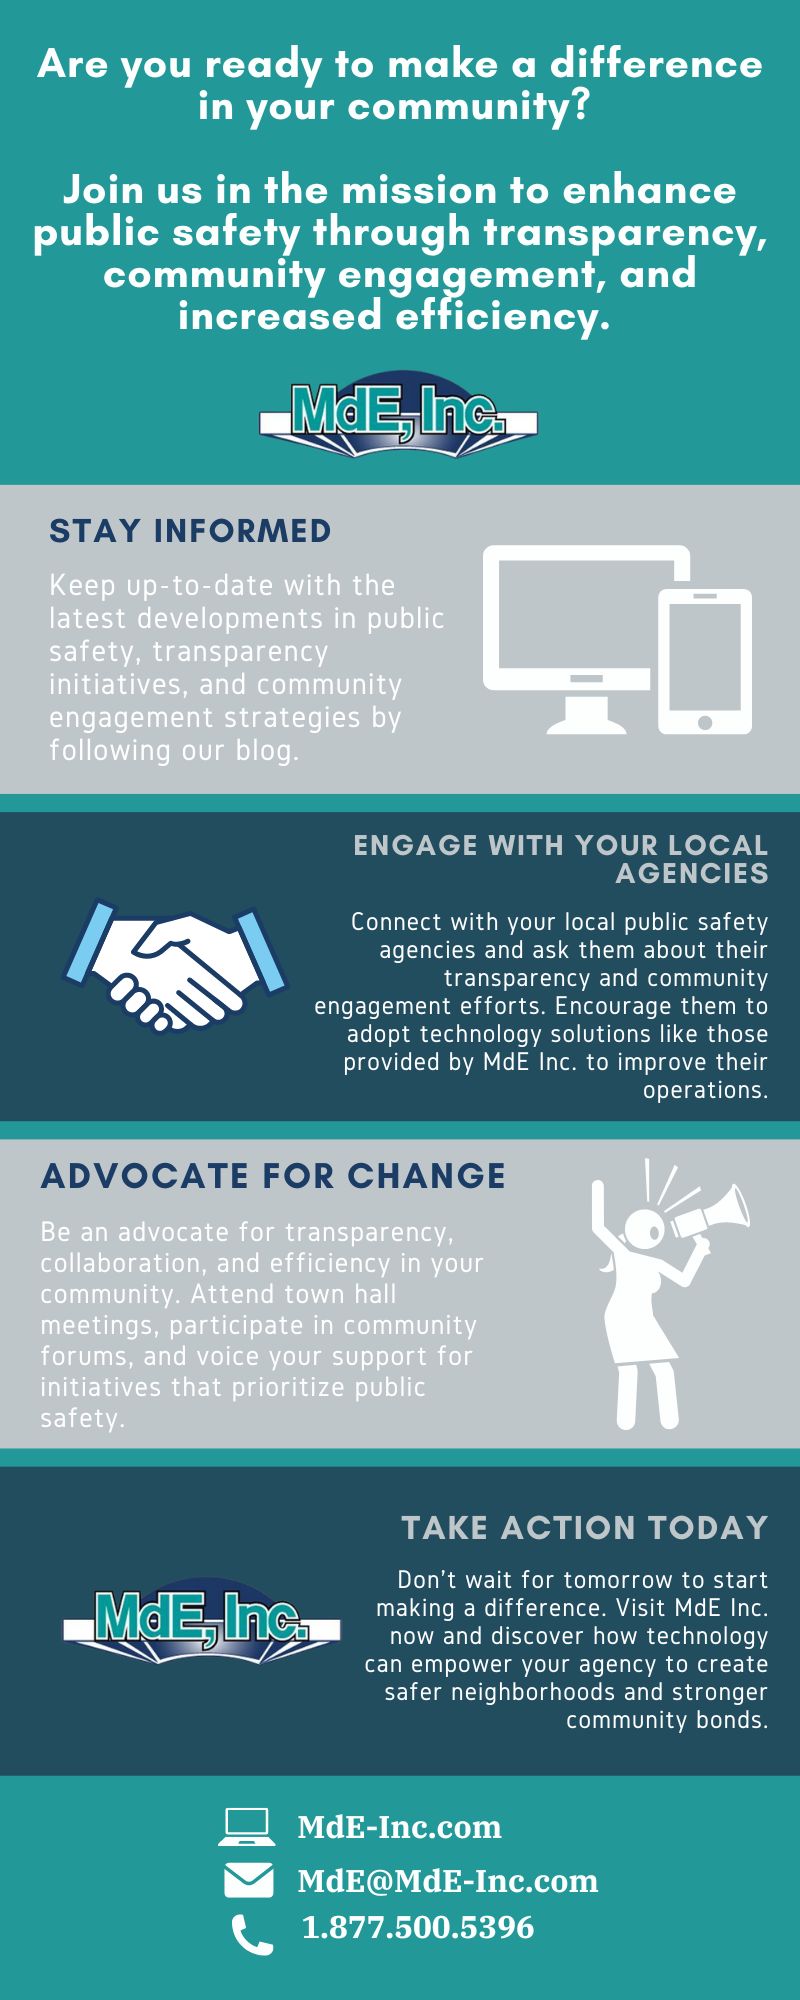 Cultivating Safer and More Engaged Communities